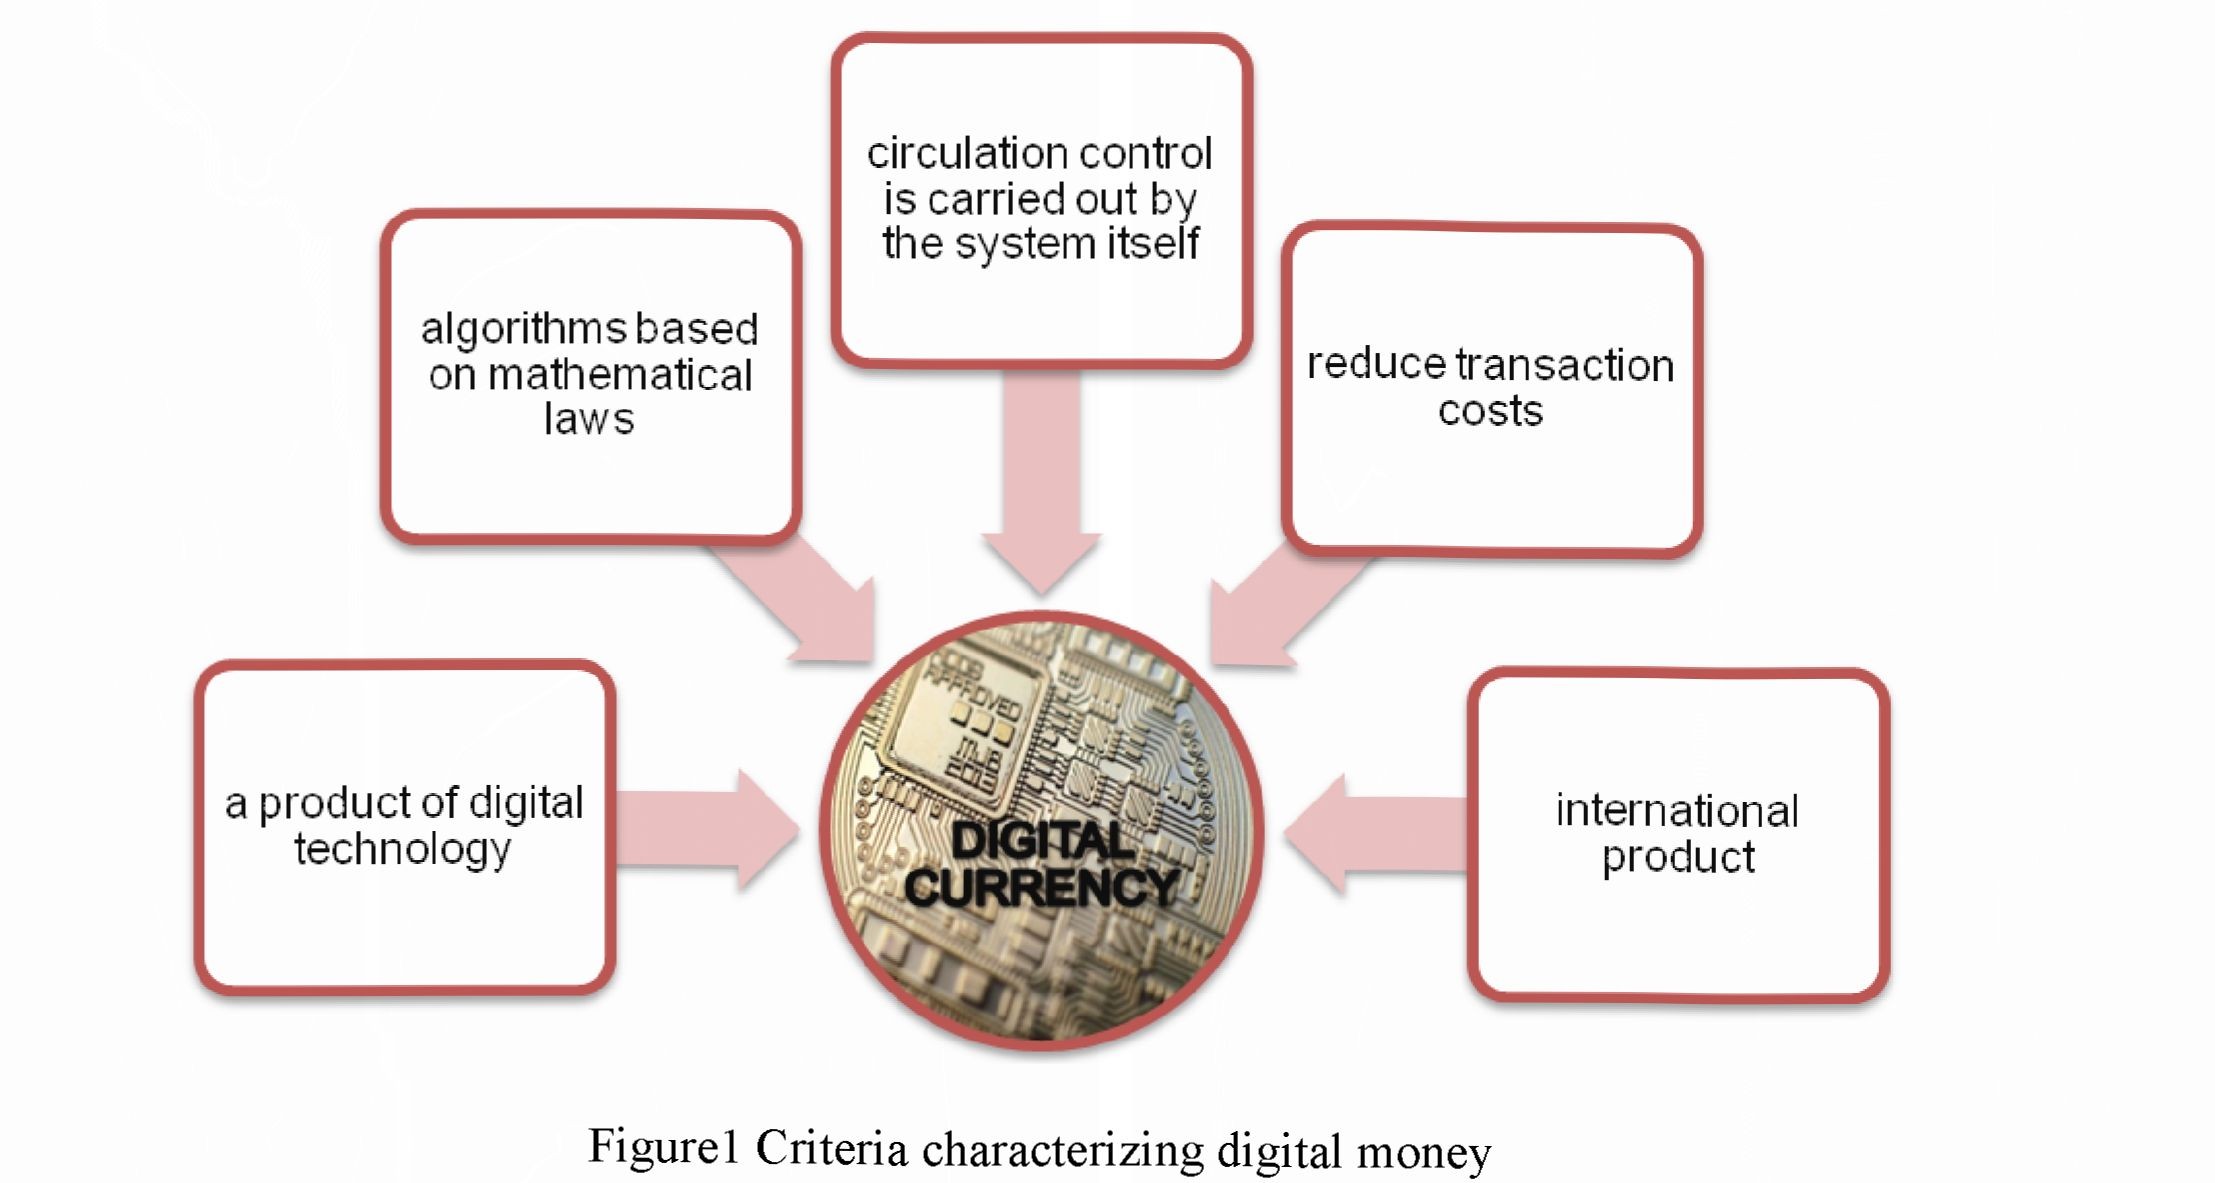 Digital currency: to be or not to be